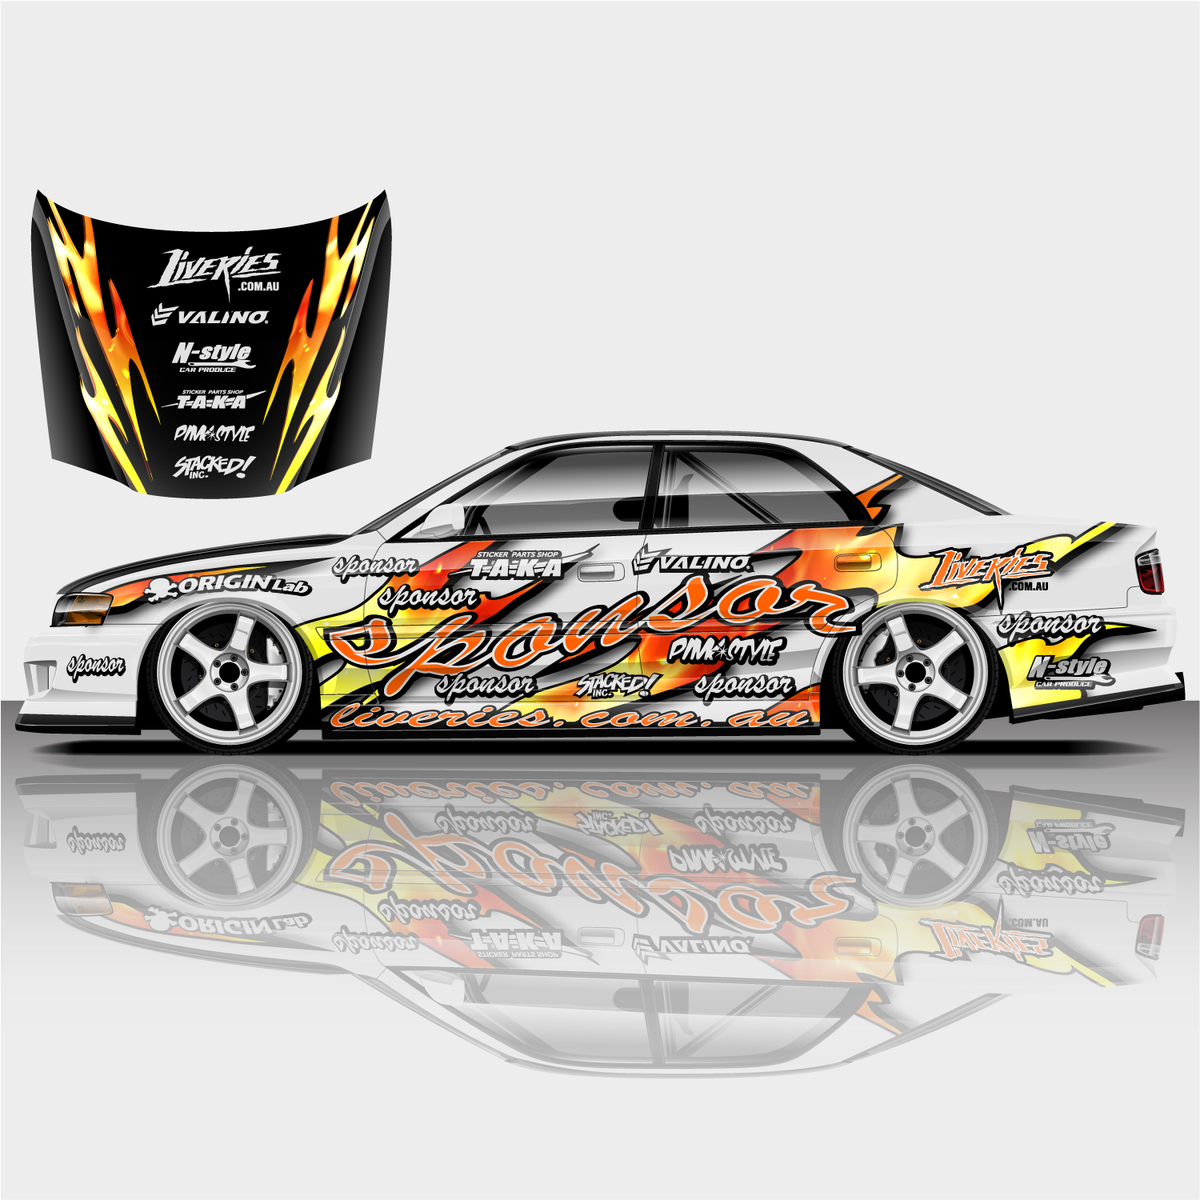 Chase The Fire Drift Livery